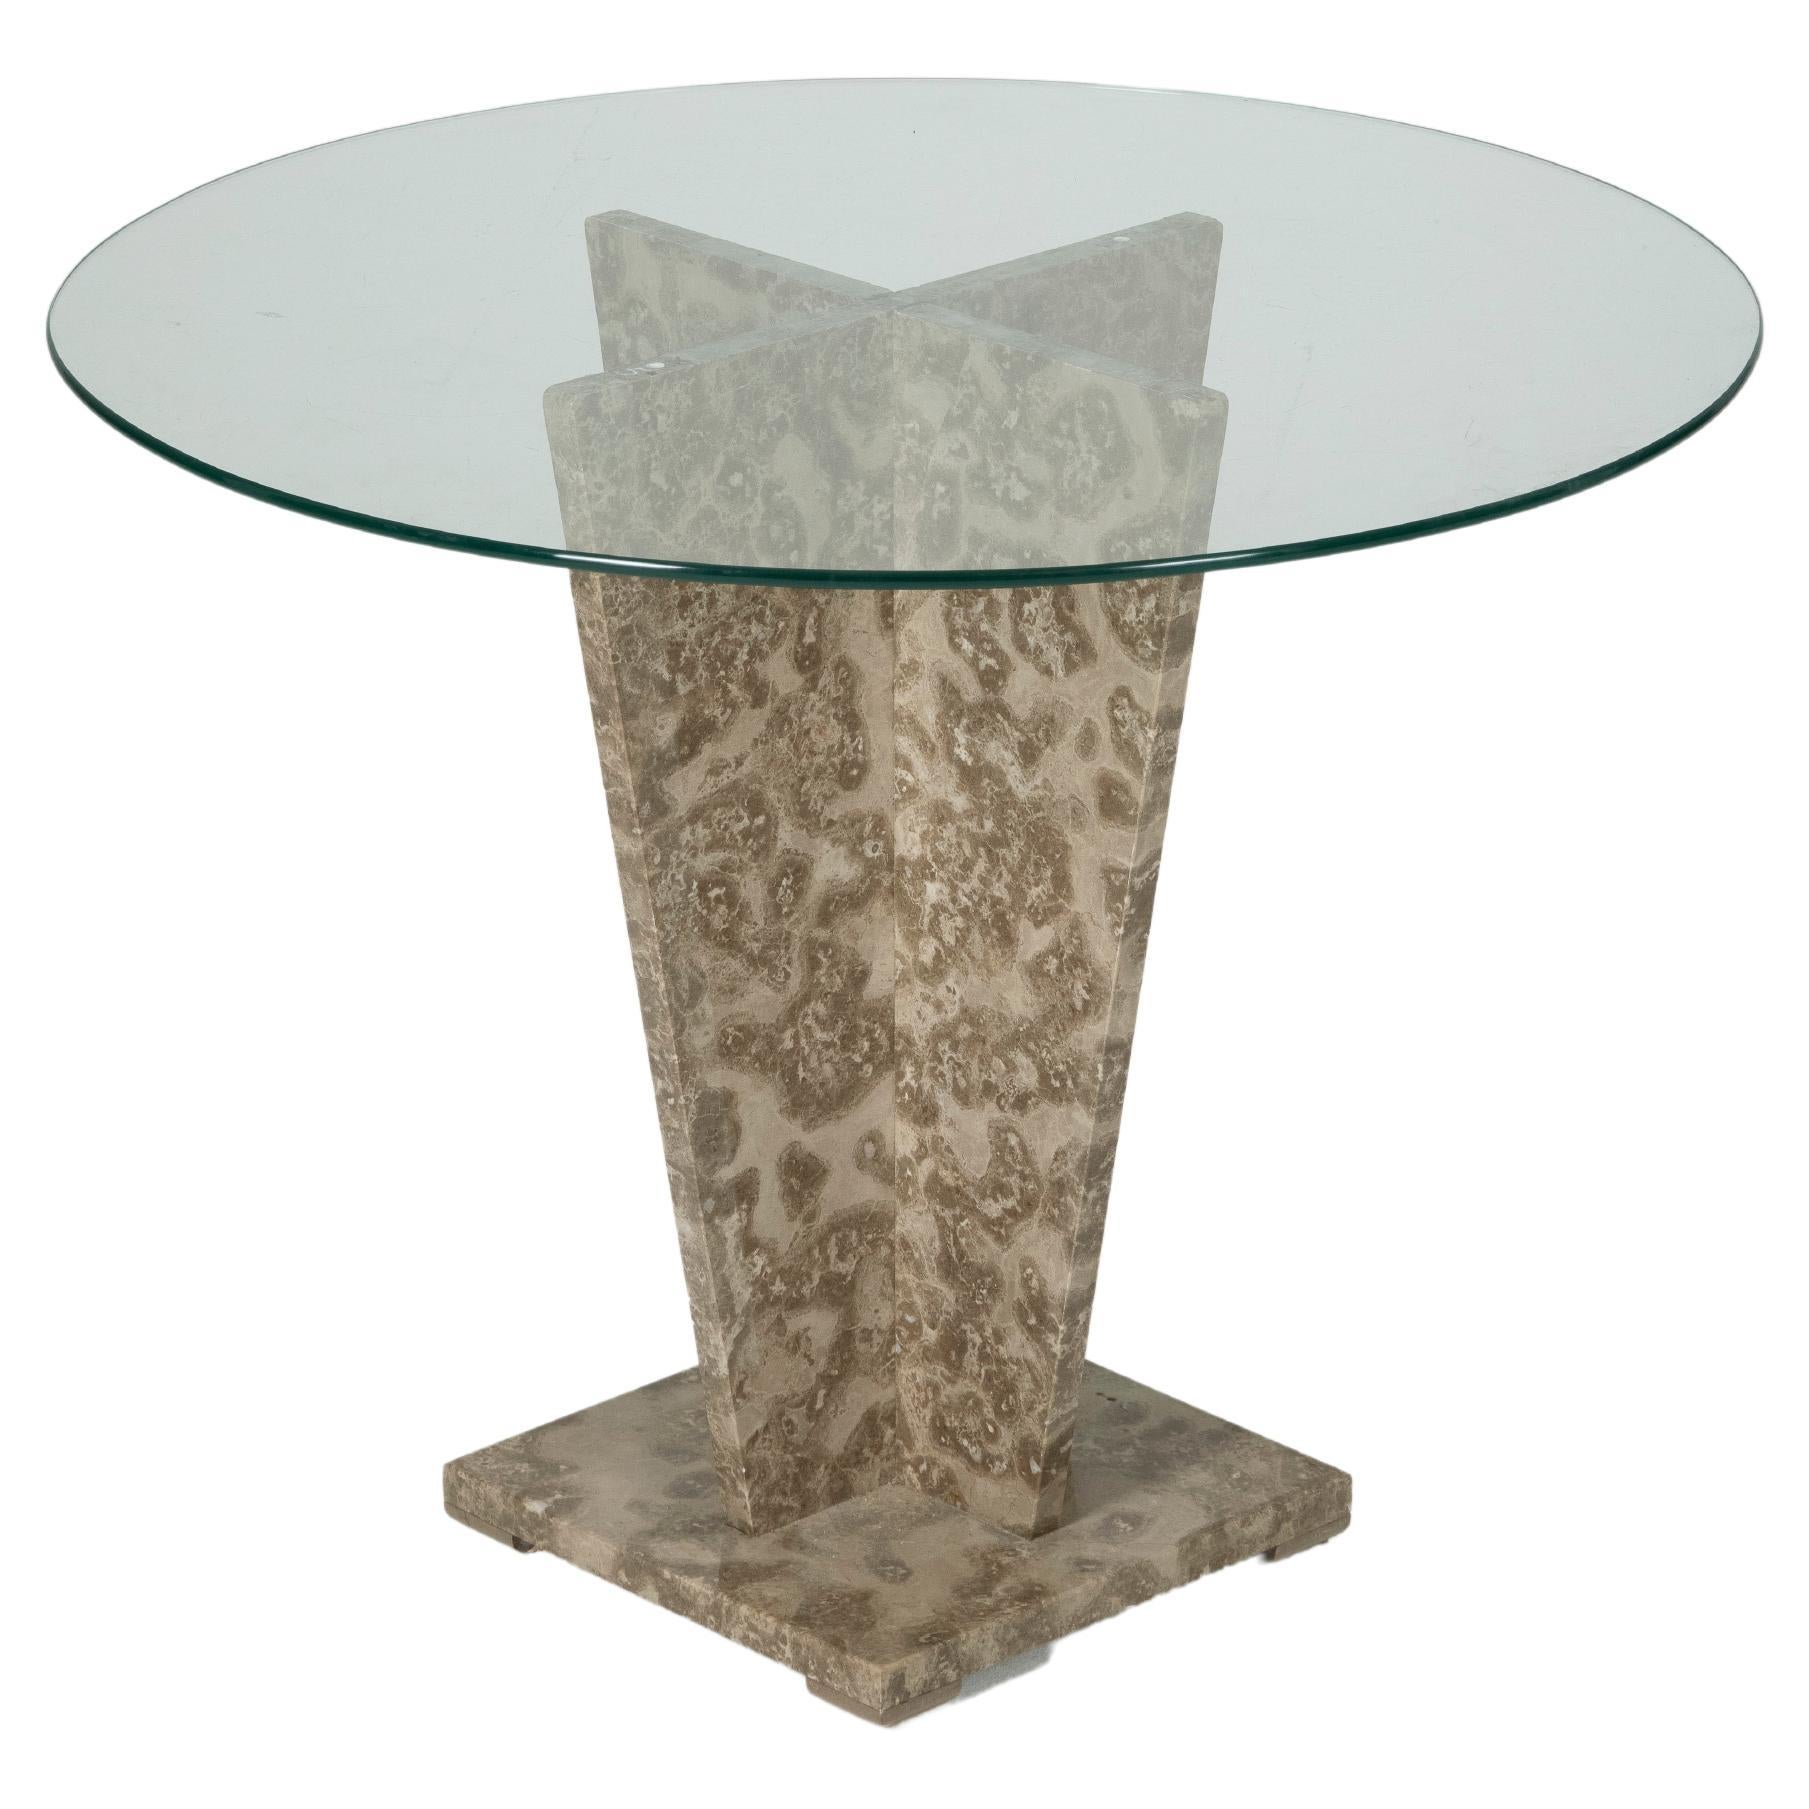 Marble and Glass Pedestal Table, 1970s